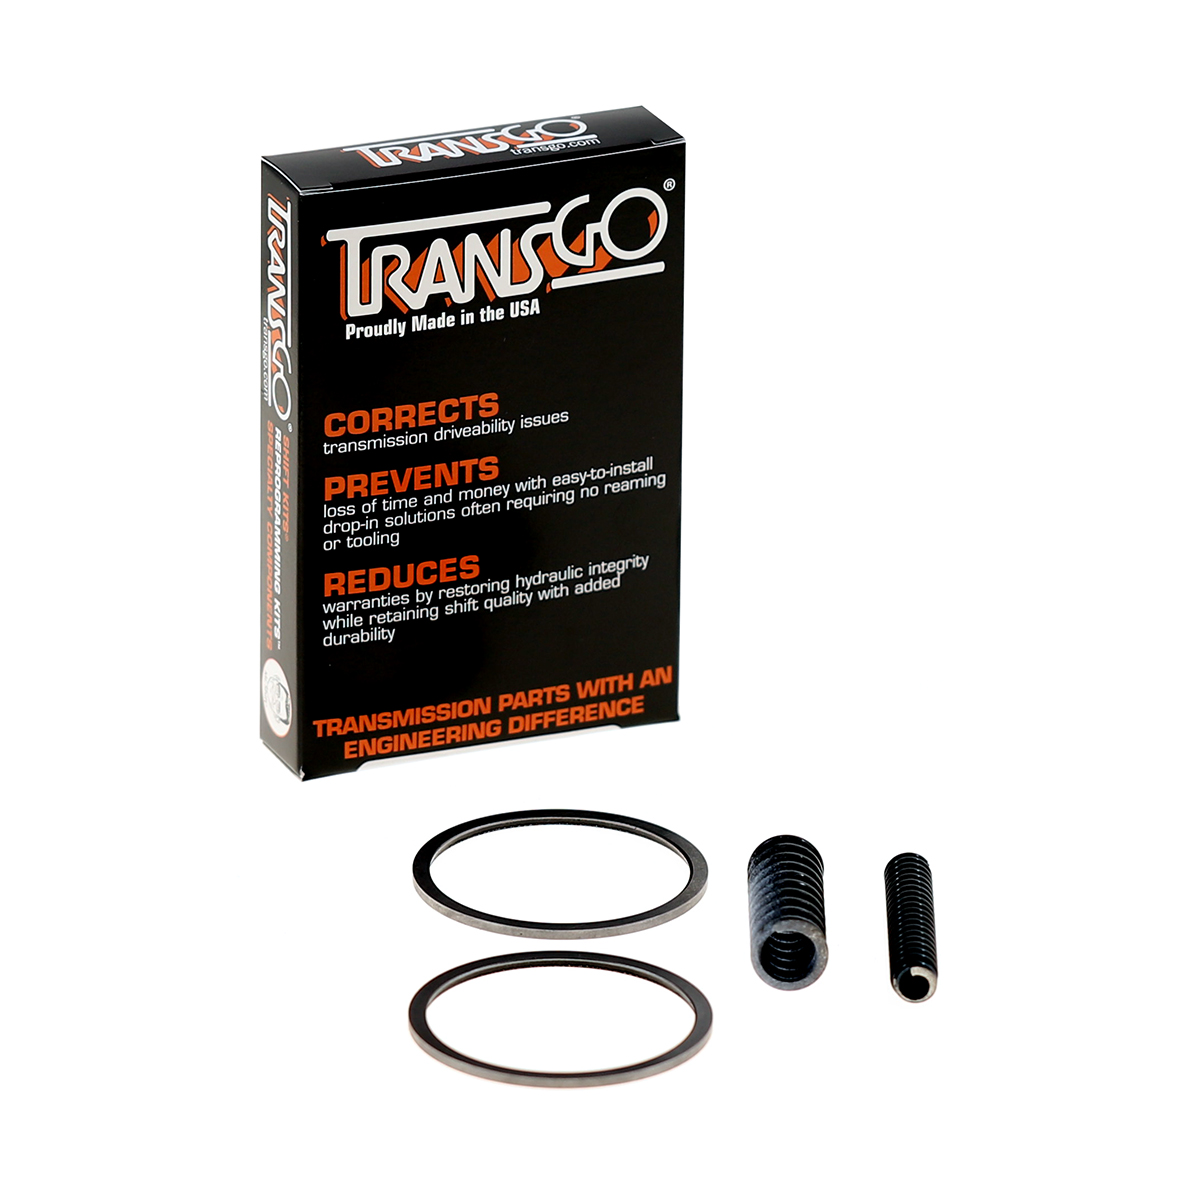 Unbreakable 6L80 High Performance Pump Ring Kit